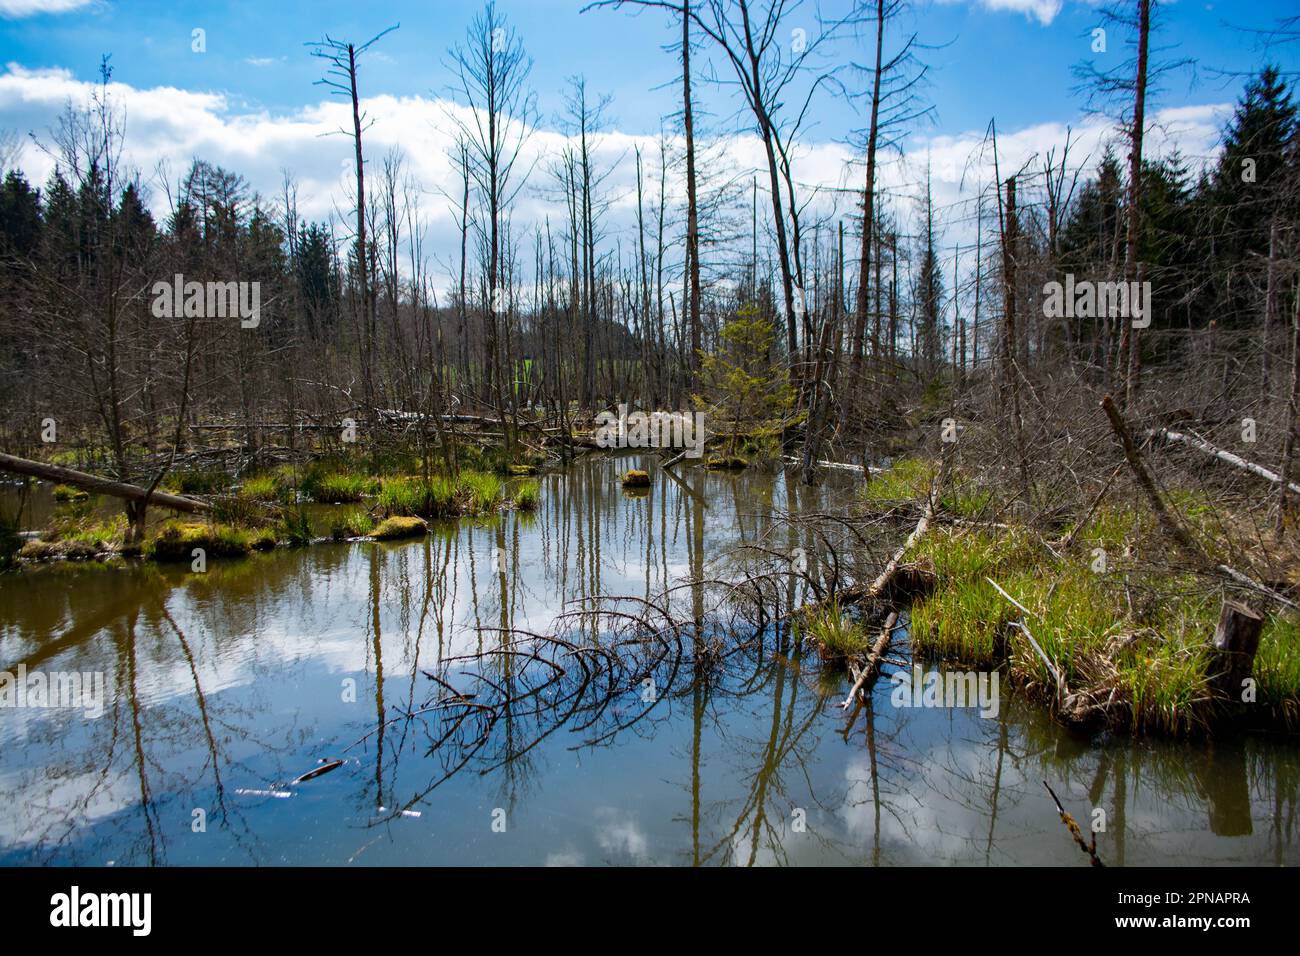 Marsh at Bad Saulgau in Germany, a nature experience forest Stock Photo